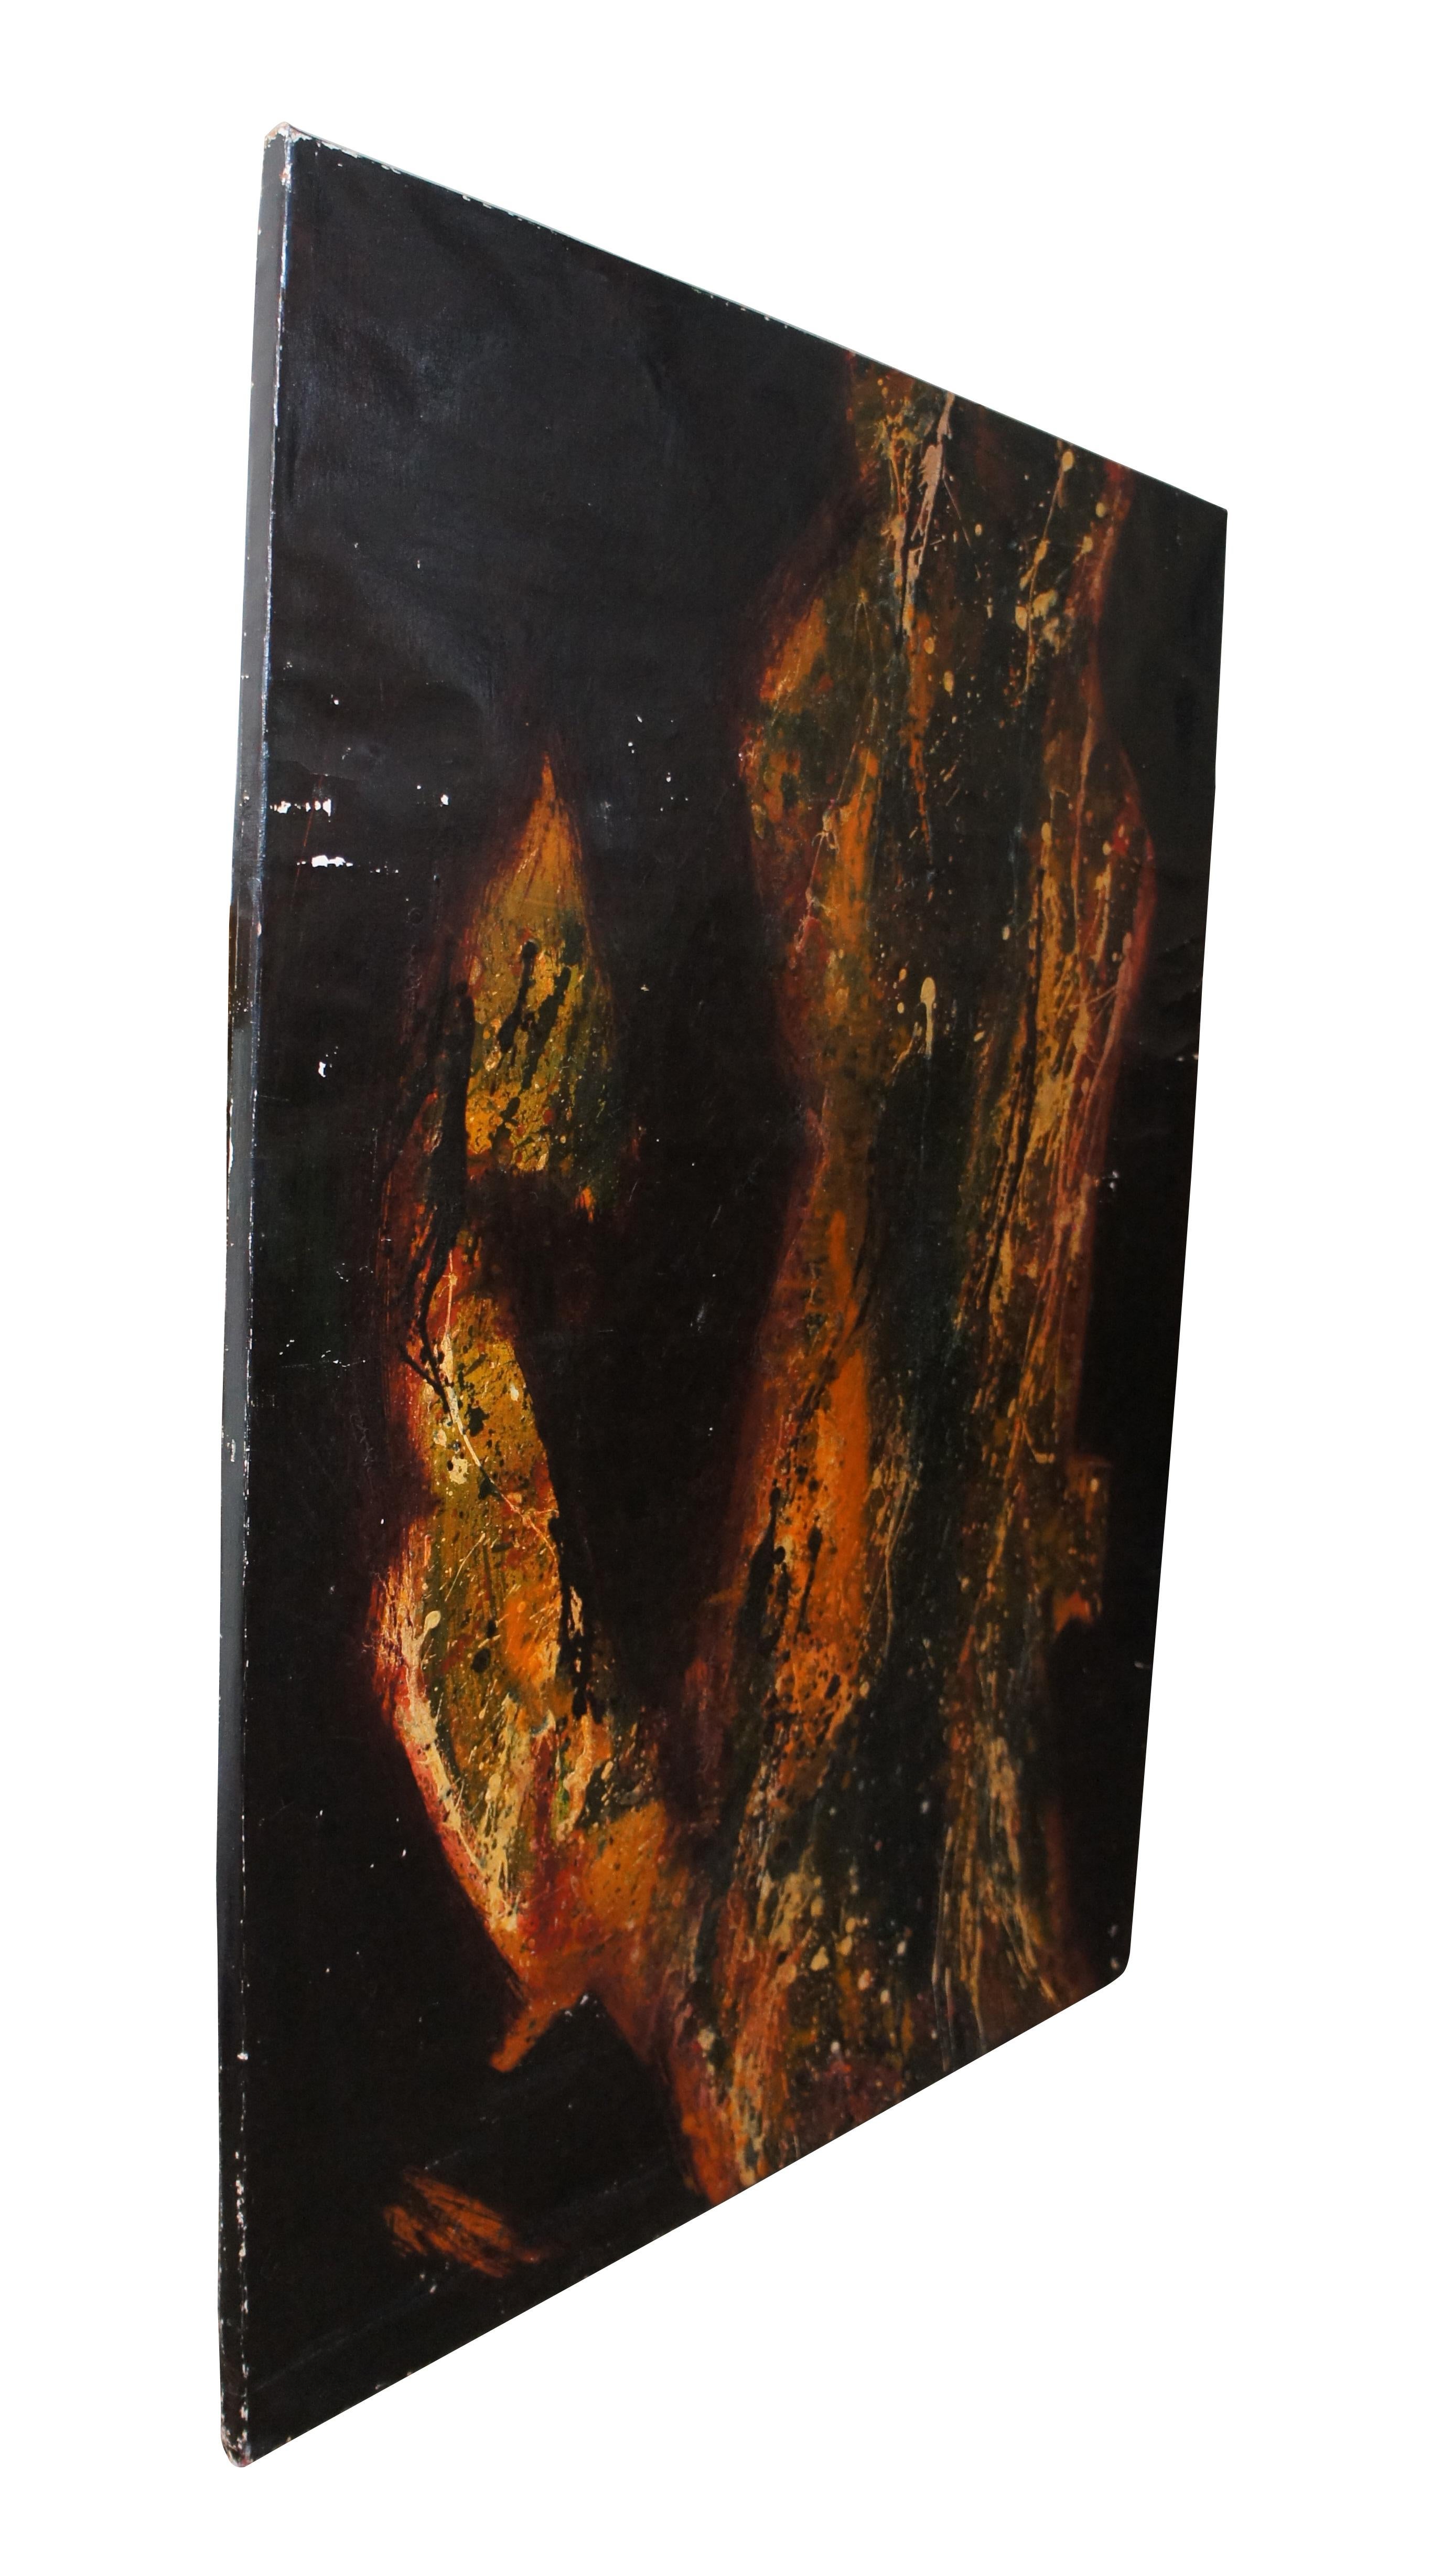 Vintage 1983 oil painting on canvas featuring an abstract fire burning in darkness.  Yellows, orange, red and black.

Dimensions:
36